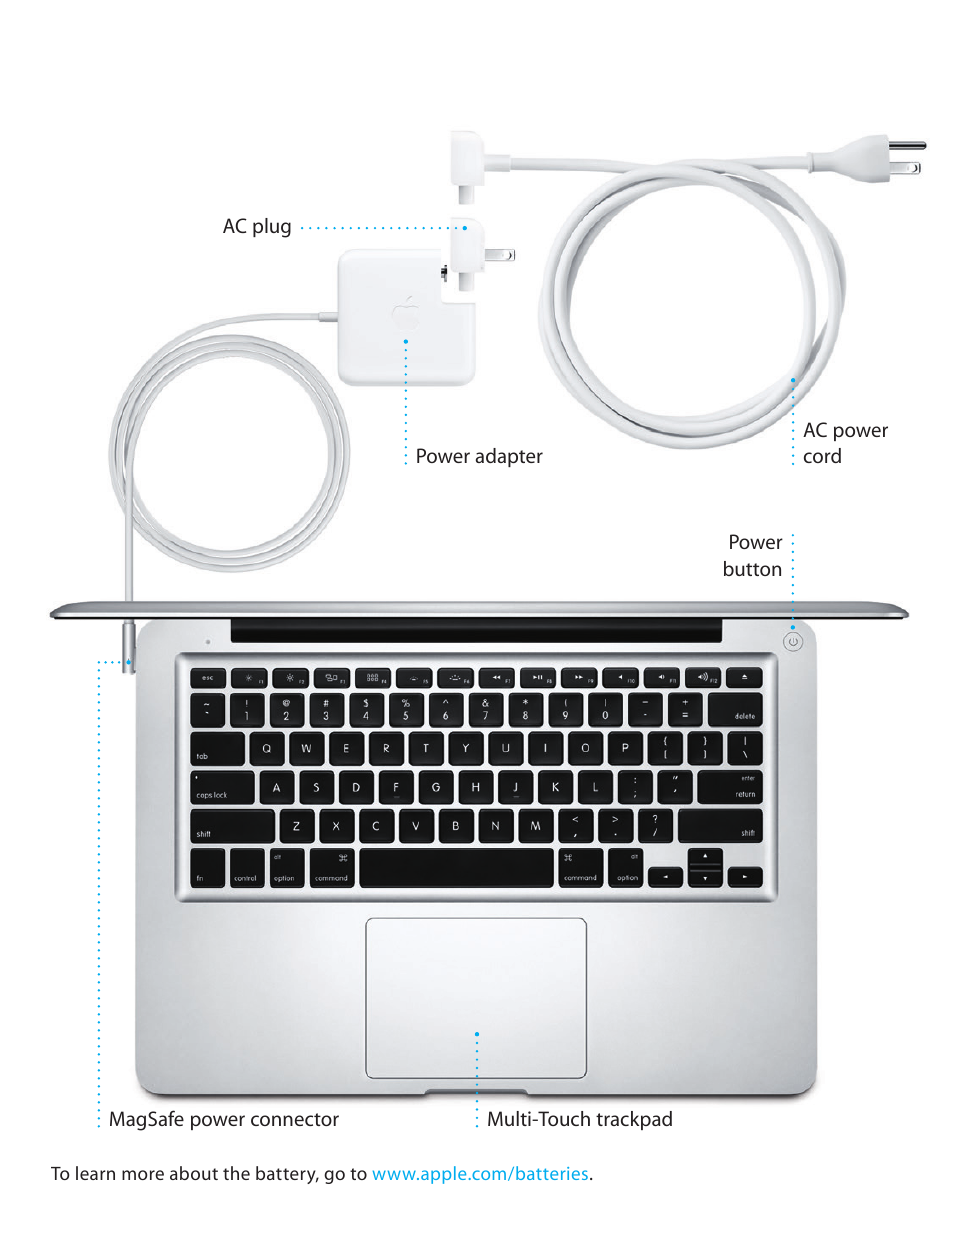 Apple MacBook Pro (13-inch, Mid 2012) User Manual | Page 4 / 20